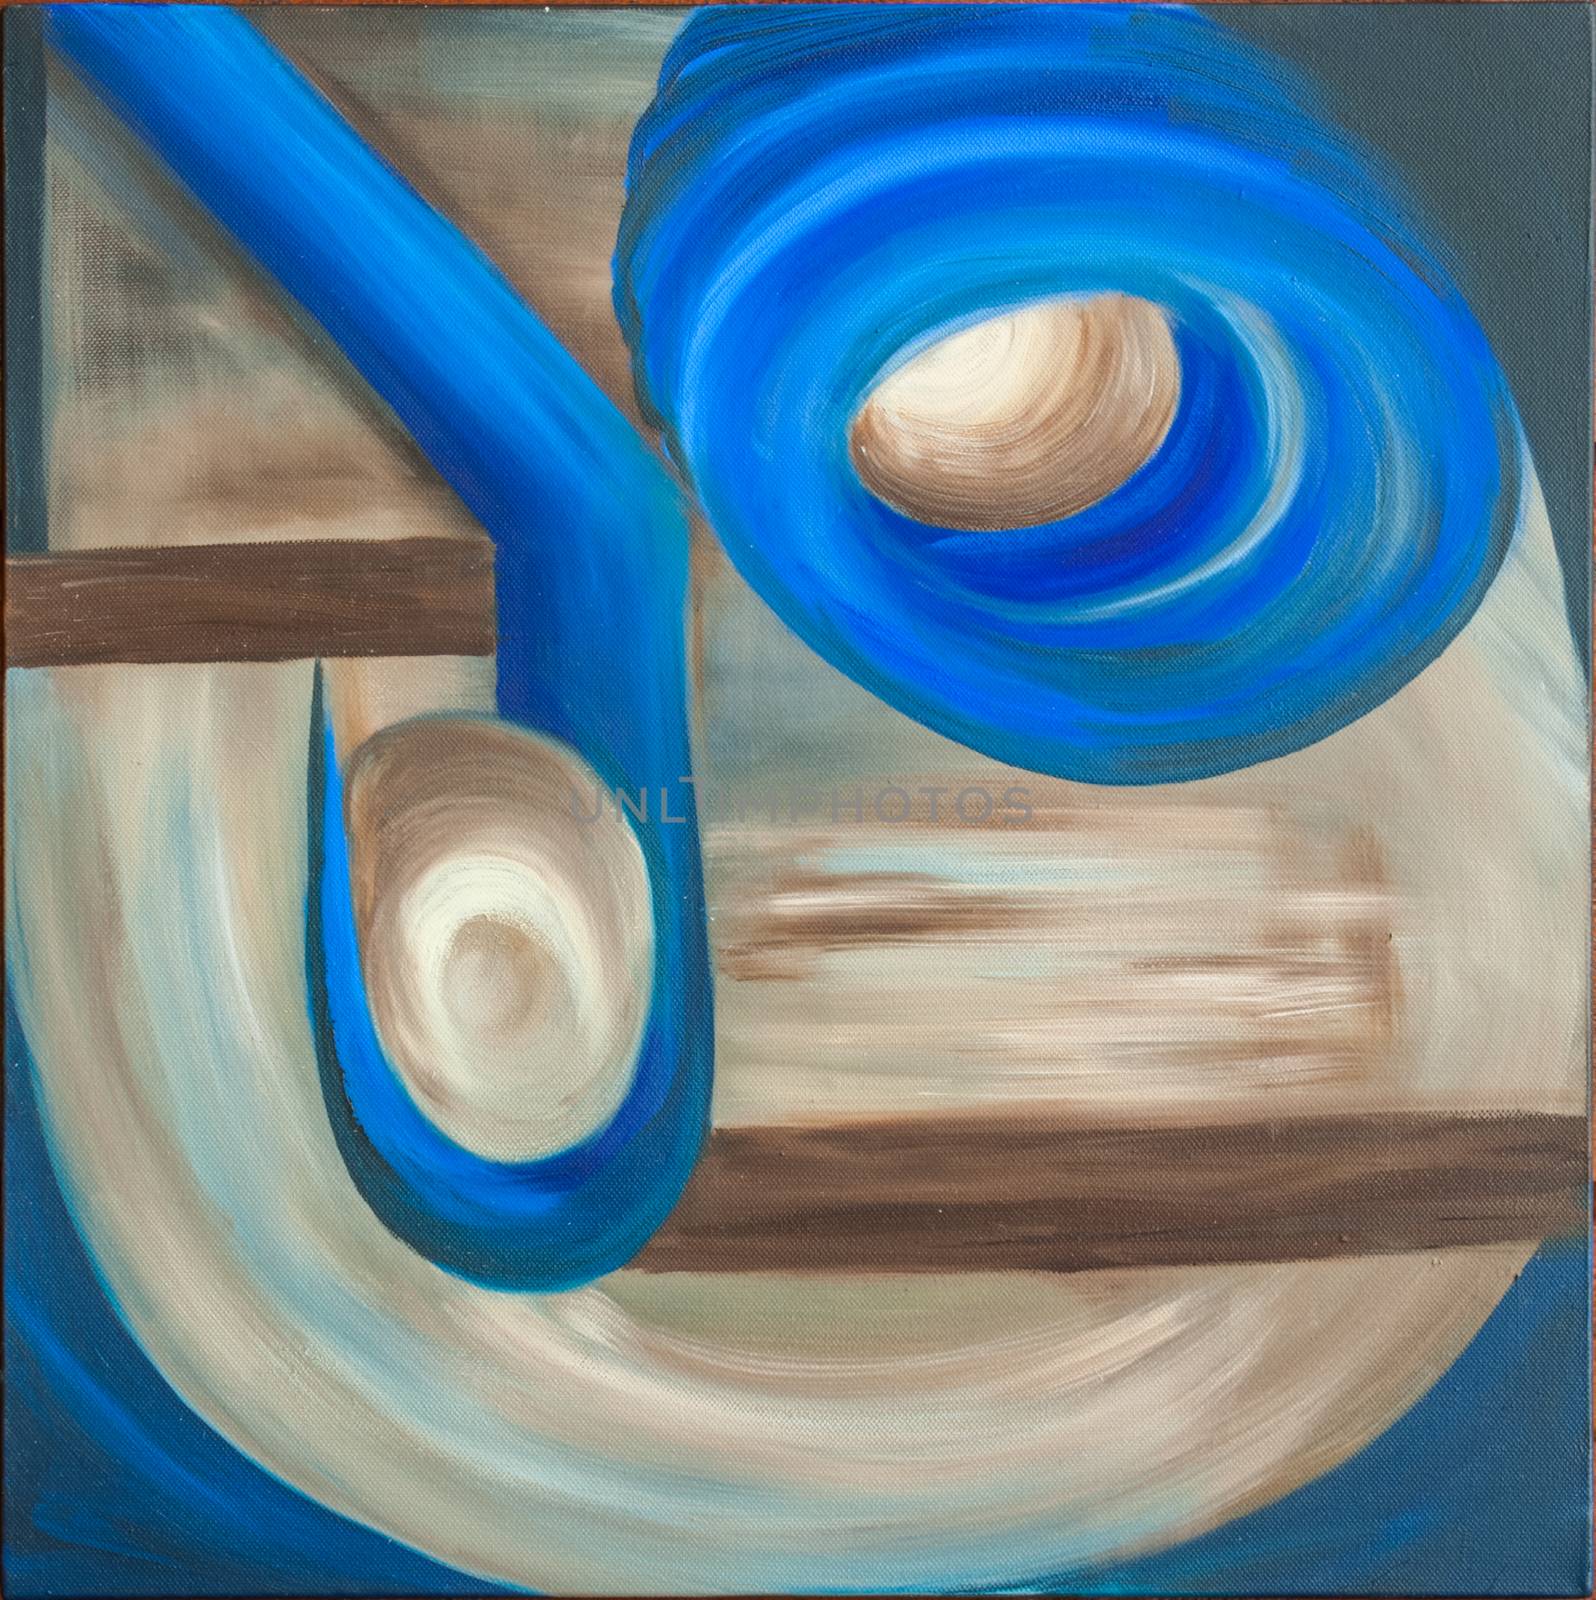 Abstract oil painting on canvas containing circular blue elements by QQJXw824zEfXDVTP9u